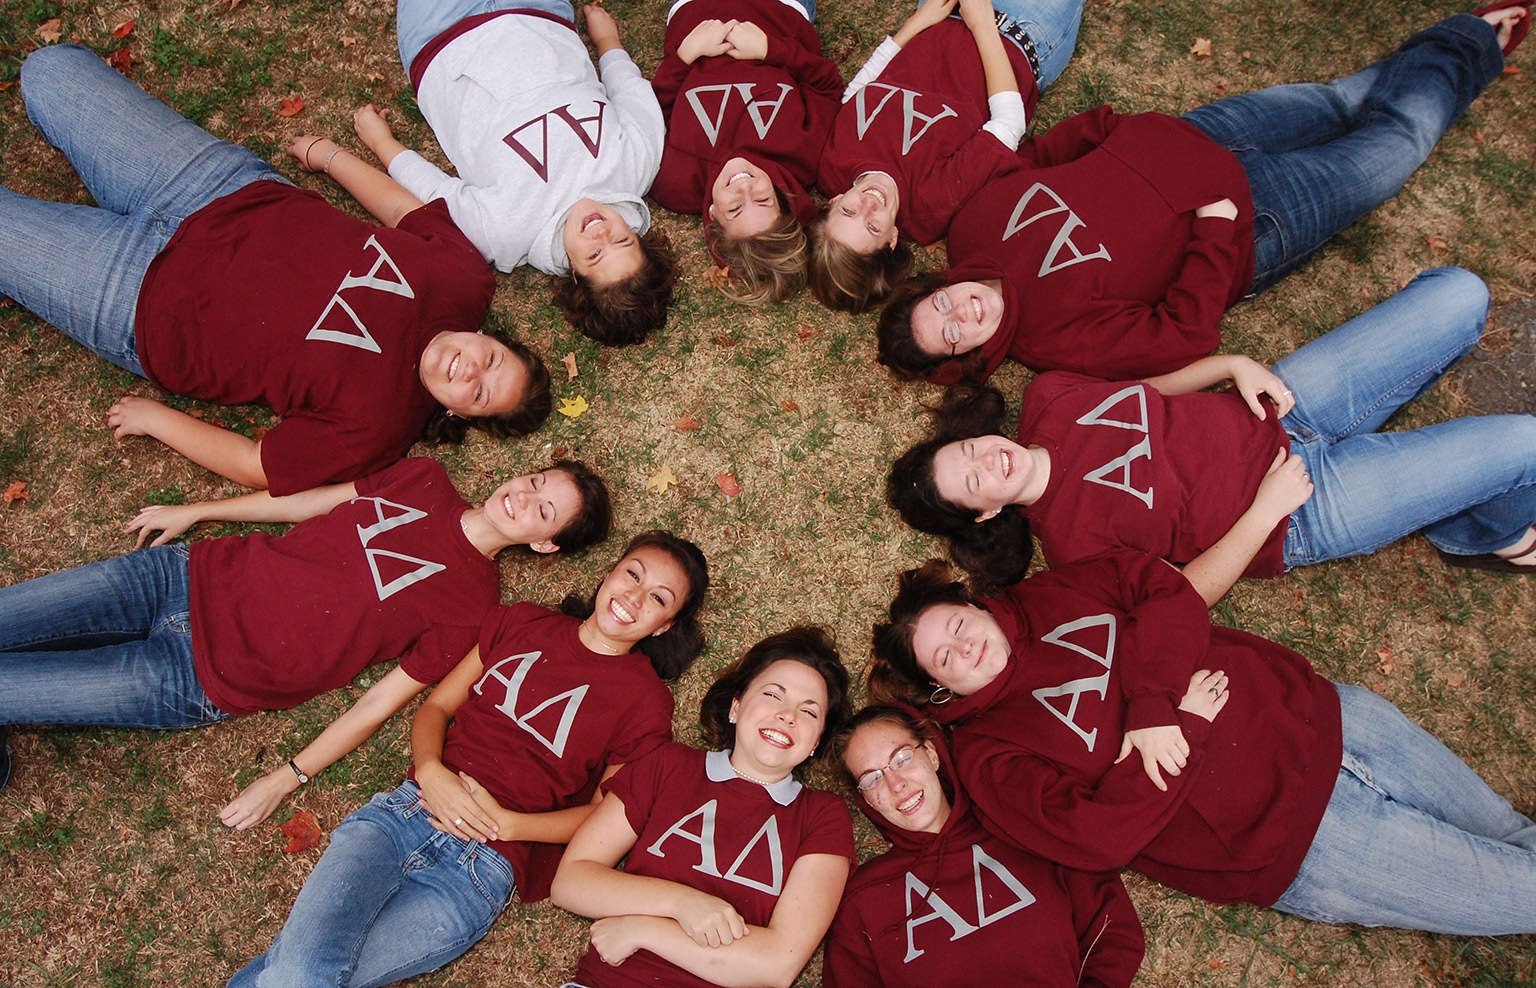 Bluefield University students showing their Alpha Delta Sorority pride.